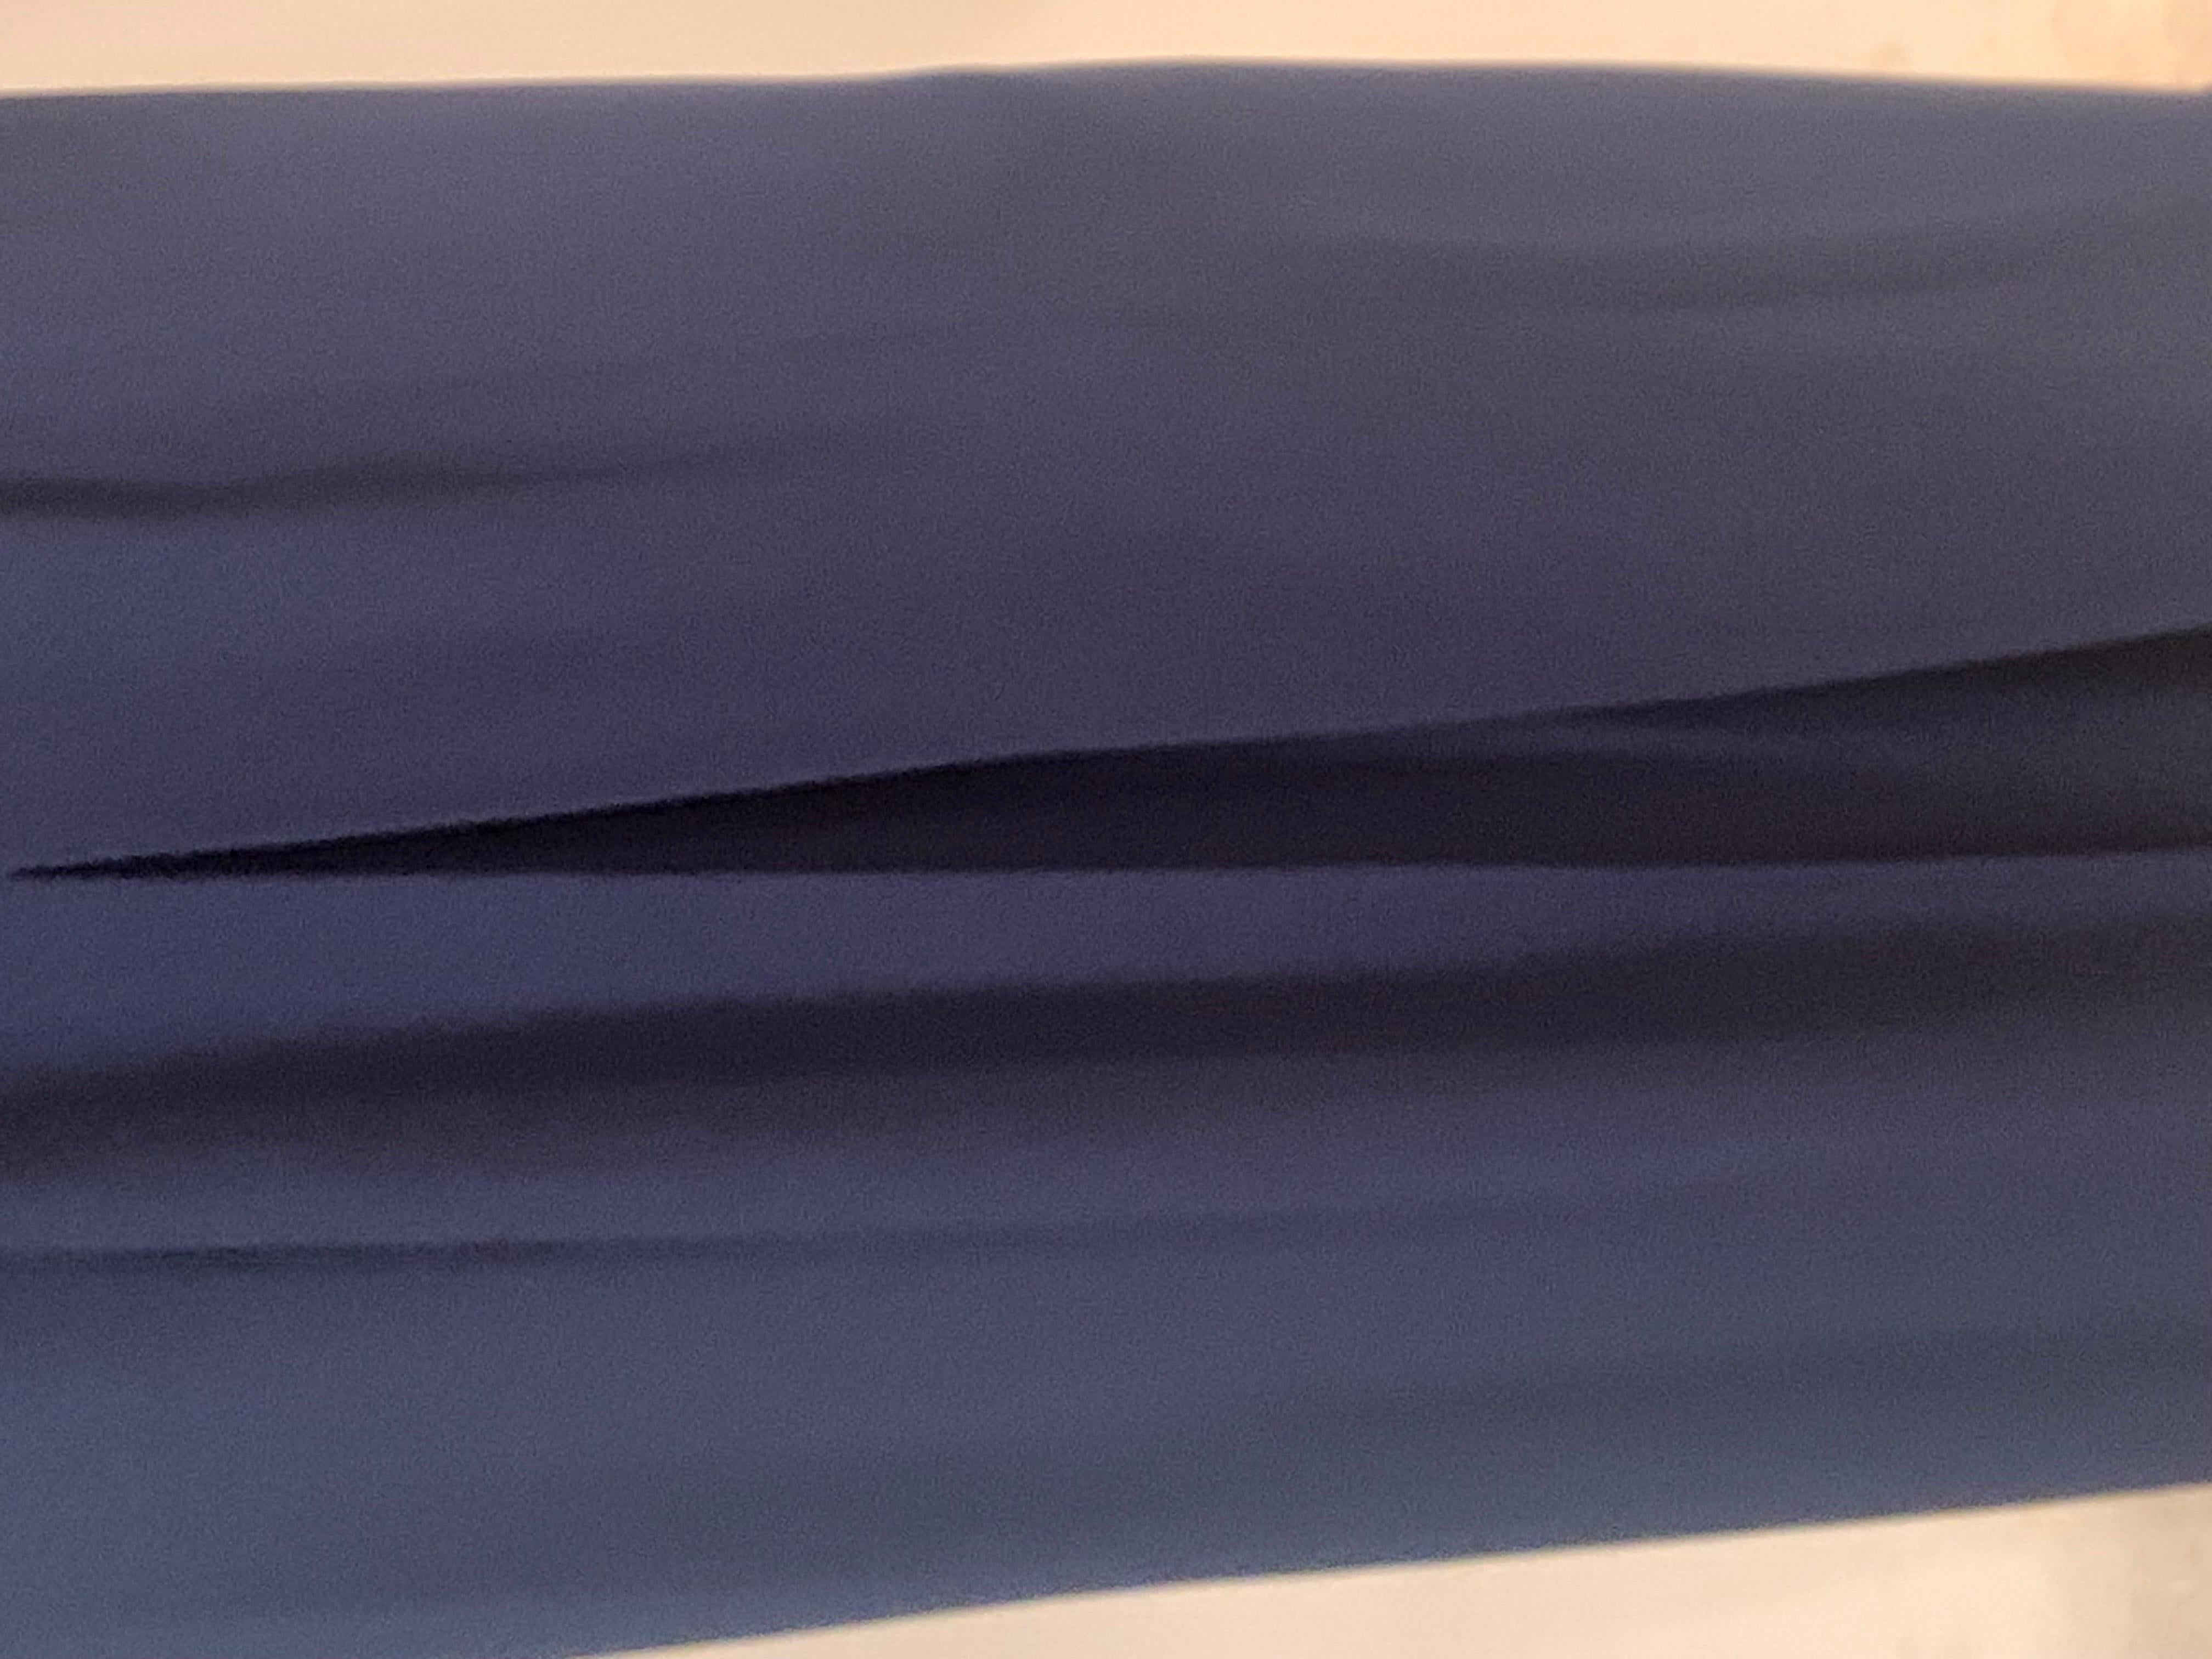 Yves Saint Laurent Navy Blue Long Skirt with Original Tags Never Worn In New Condition For Sale In New Hope, PA